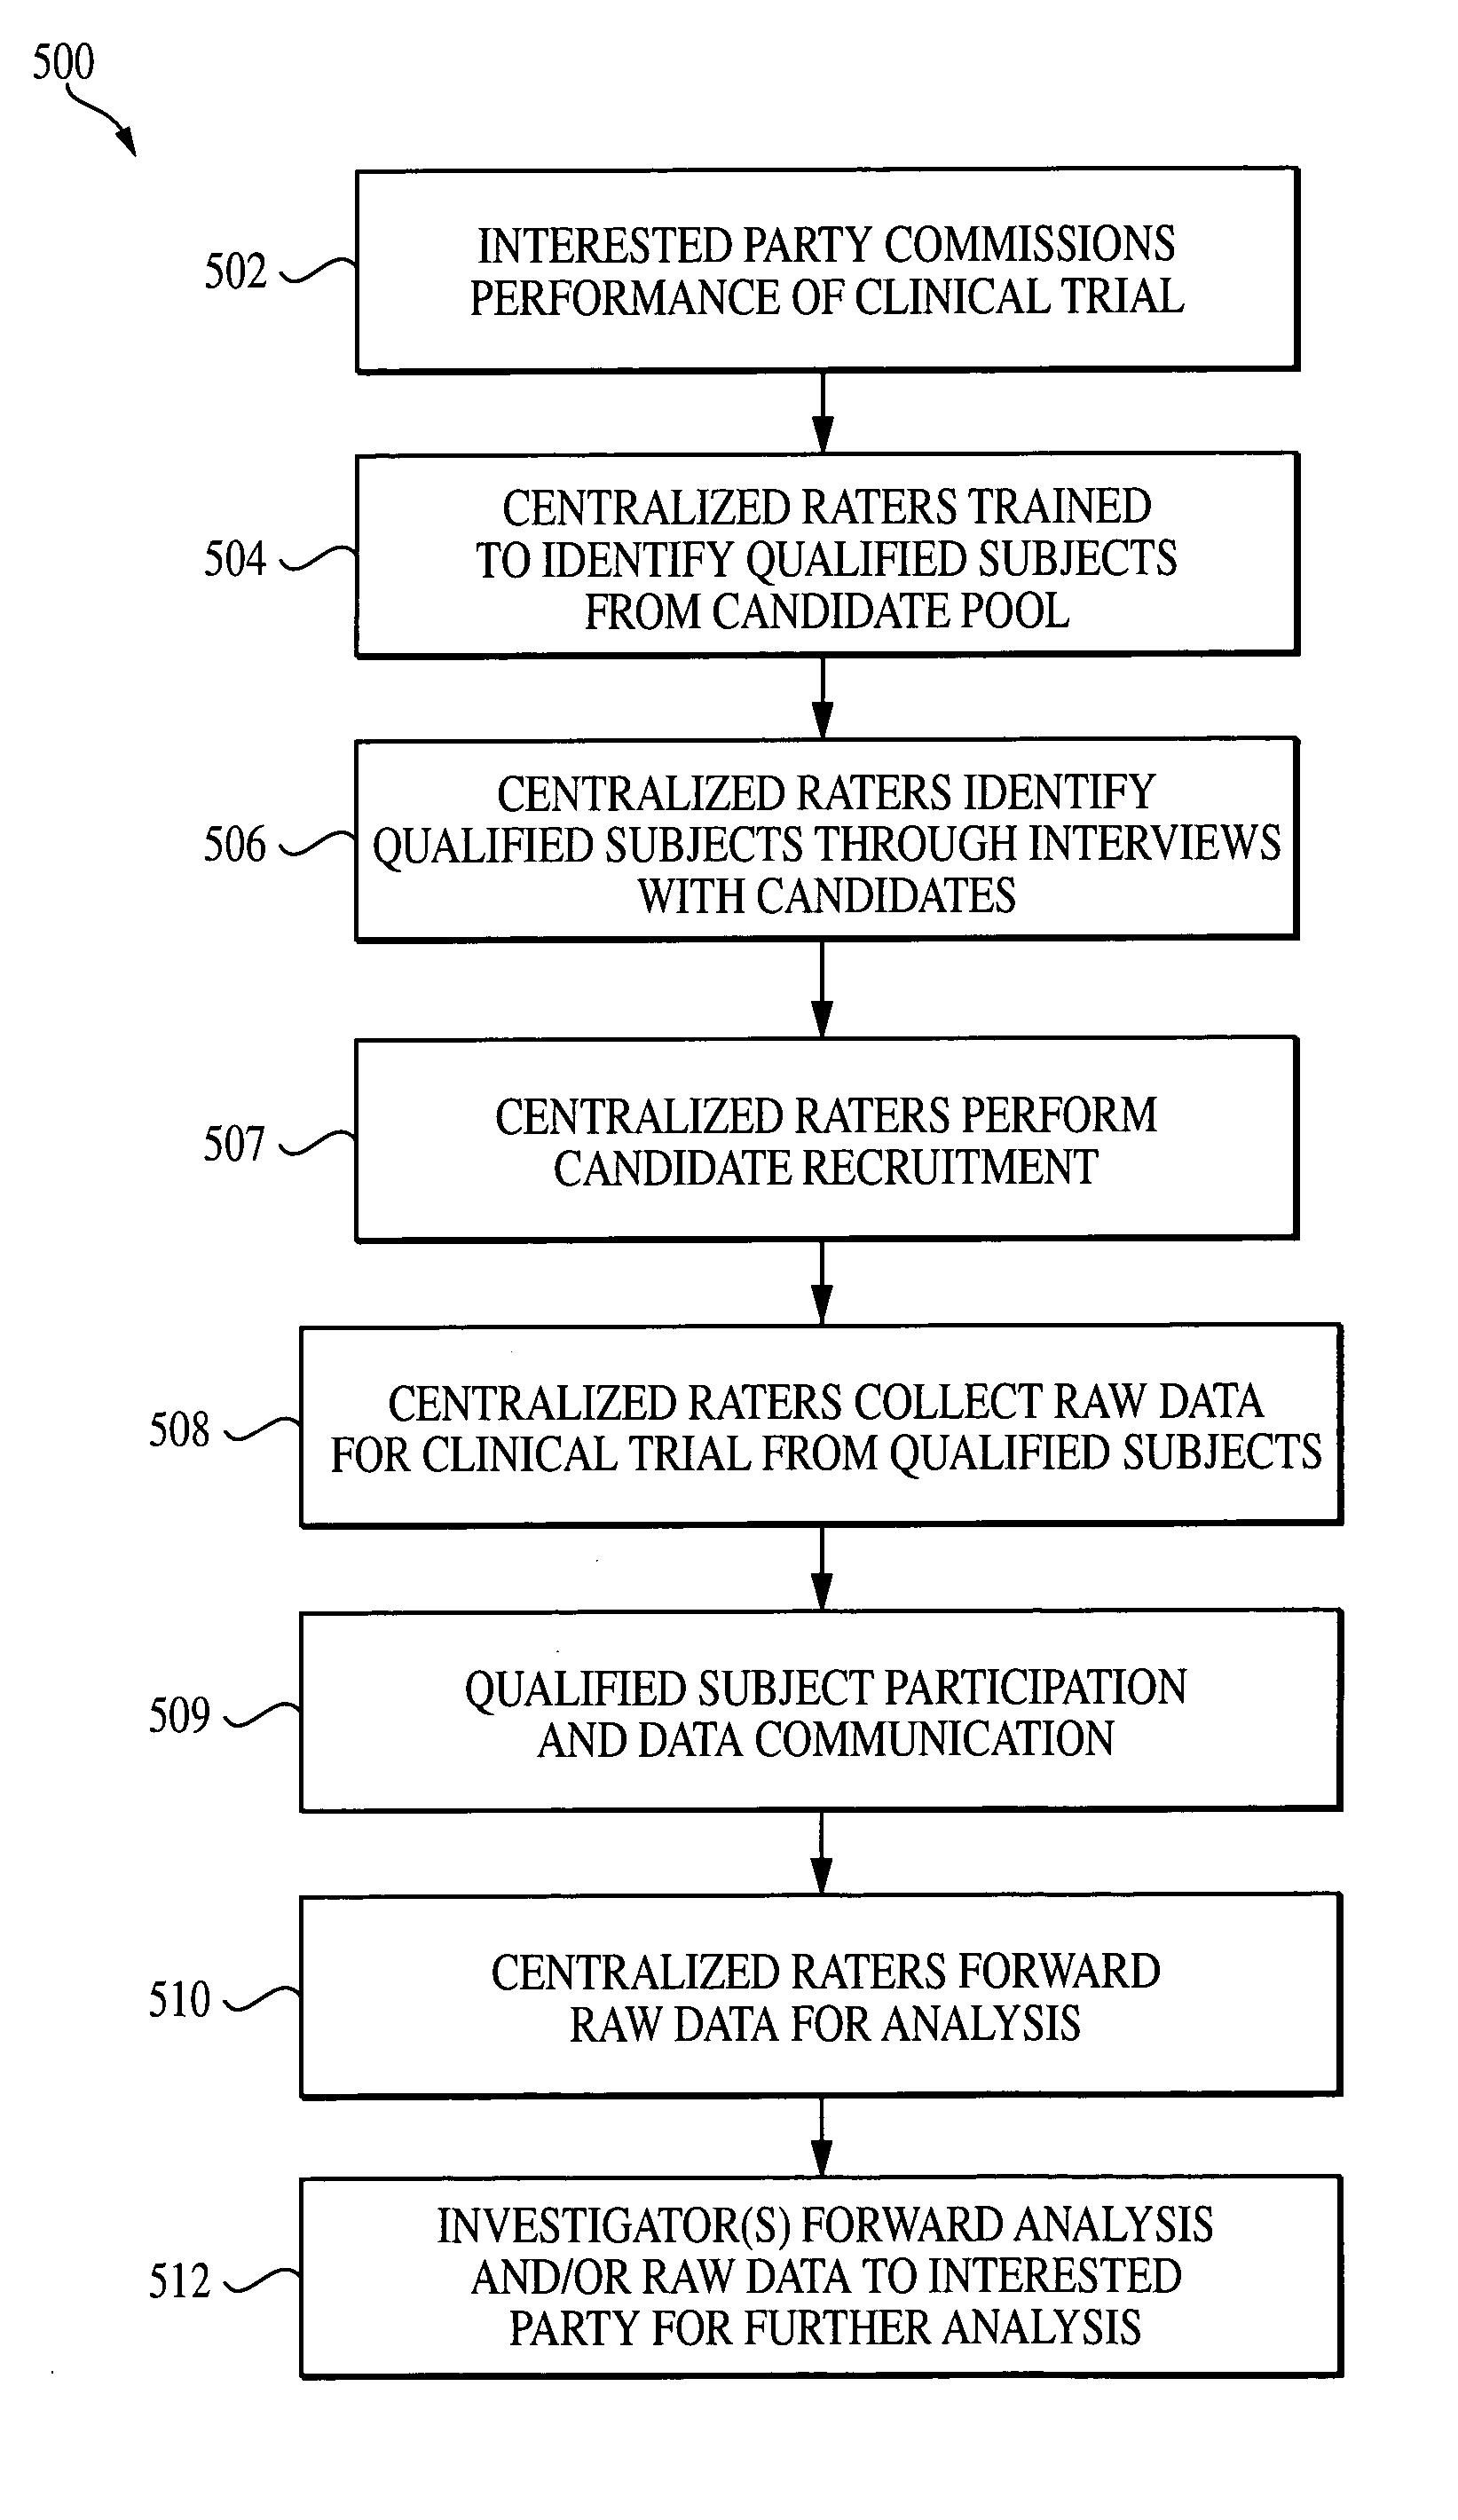 System and method for facilitating centralized candidate selection and monitoring subject participation in clinical trial studies